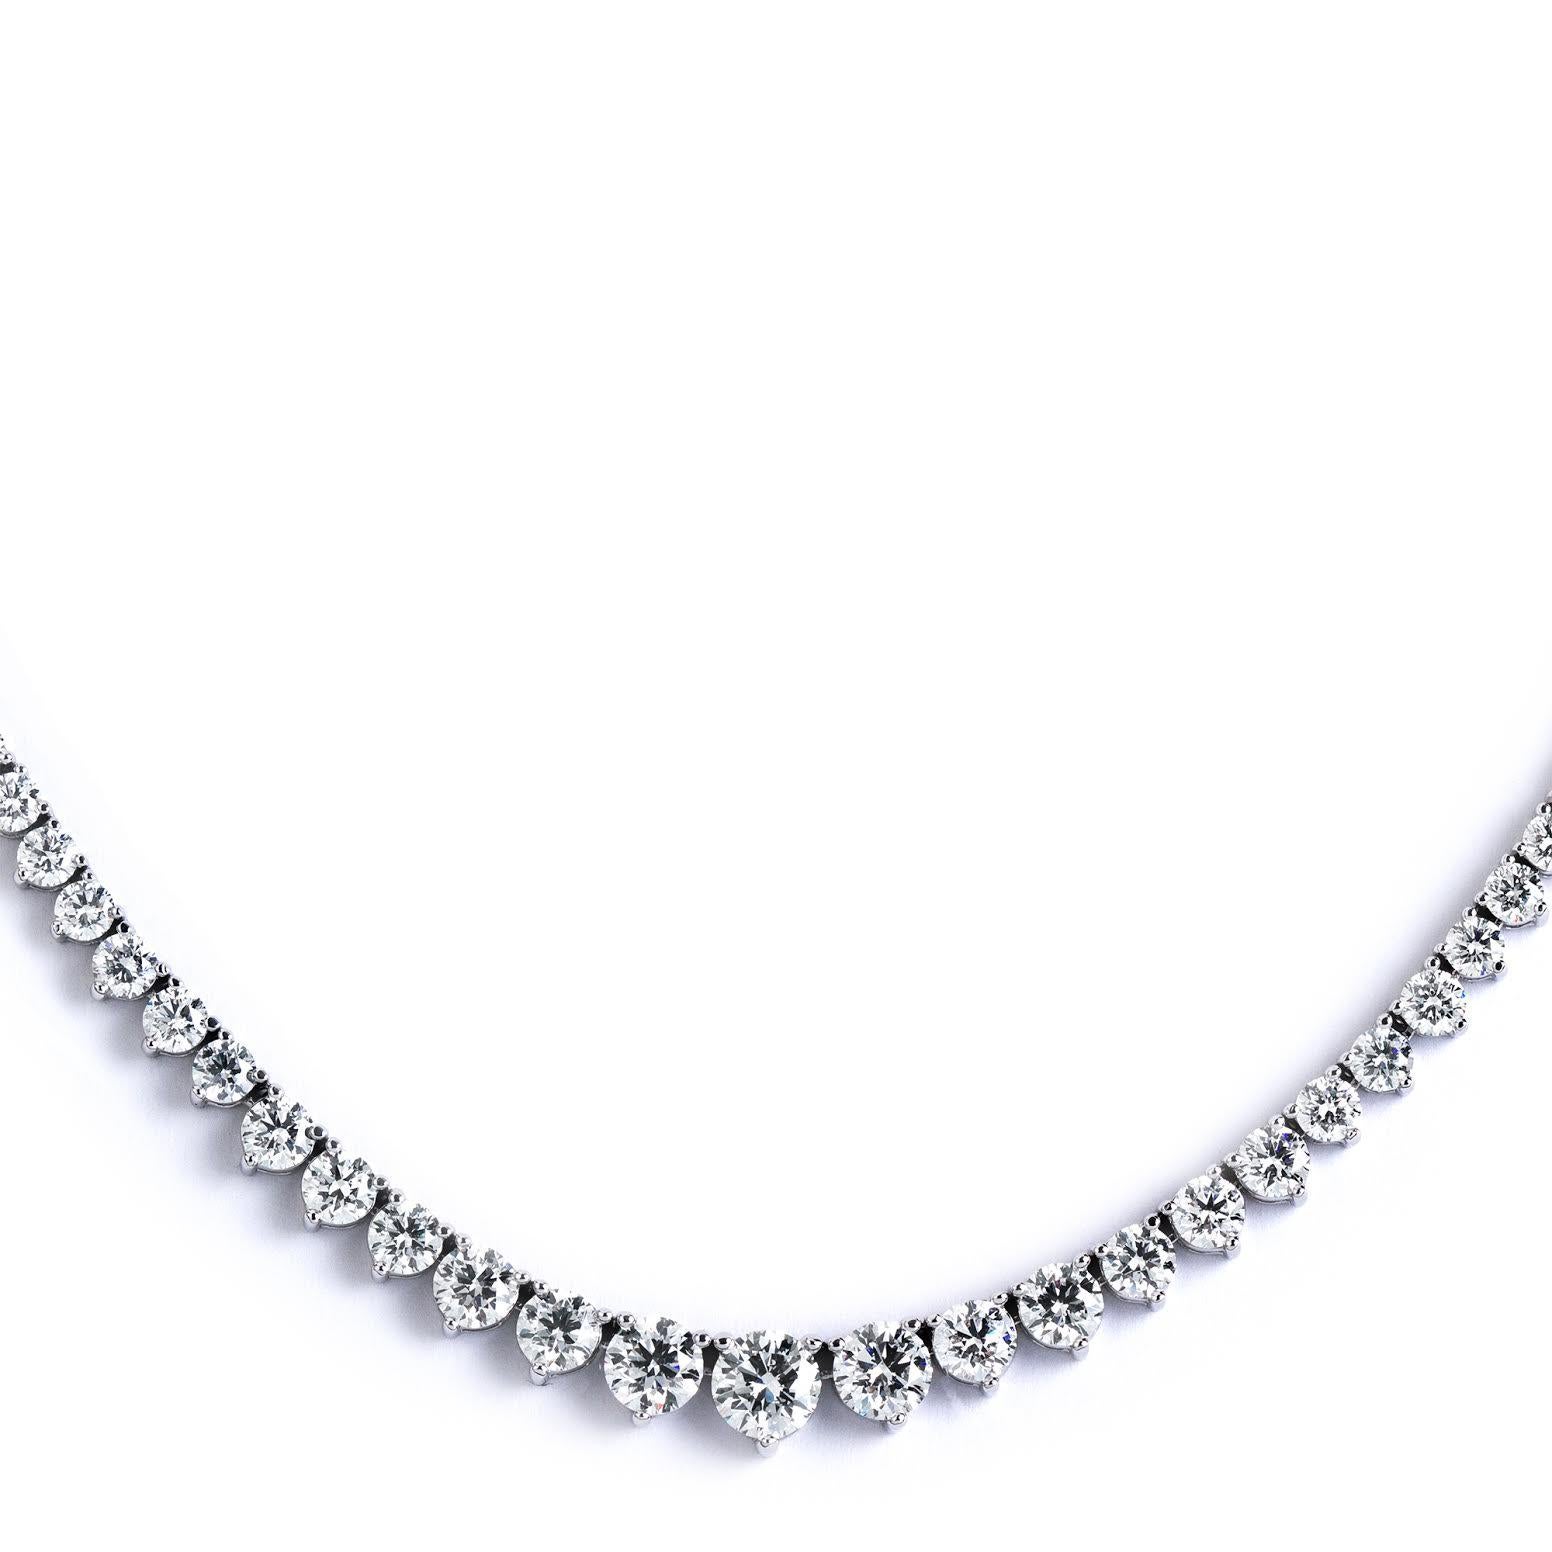 This exquisite graduated riviera necklace set in handmade 18k white gold featuring perfectly cut ideal round brilliant diamonds. the super white diamonds are in E-F color and VVS to VS clarity with a total carat weight of 10.75.
the center stone is